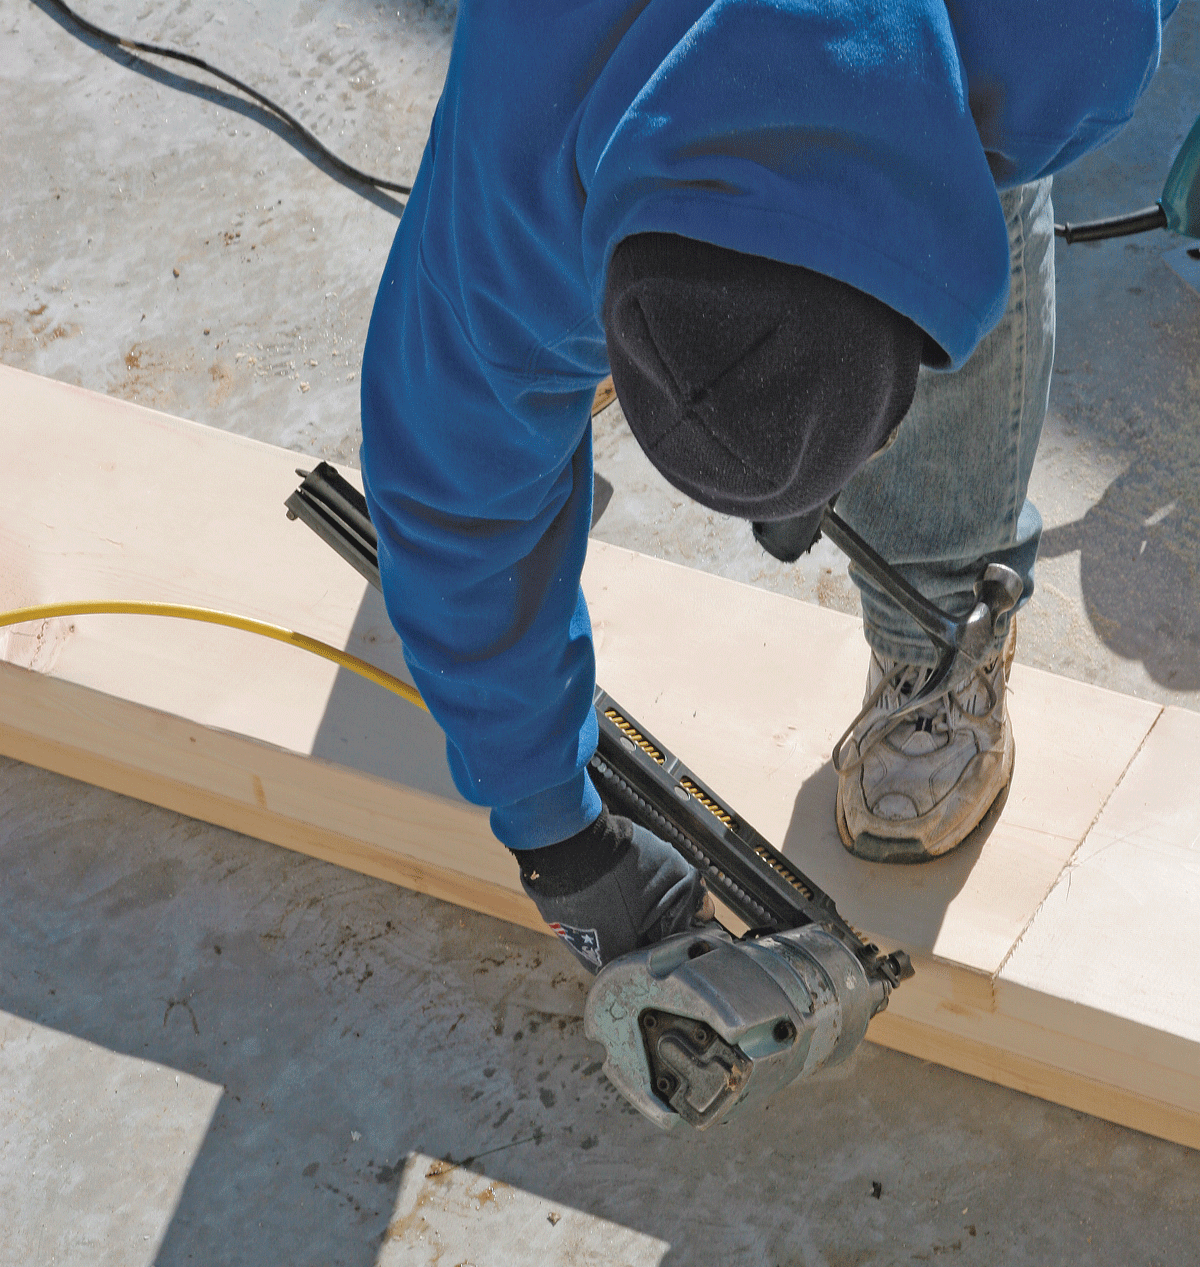 To align boards edge to edge, drive a toenail into the edge of the overhanging board, then pound the nail with a hammer until the board edges line up.